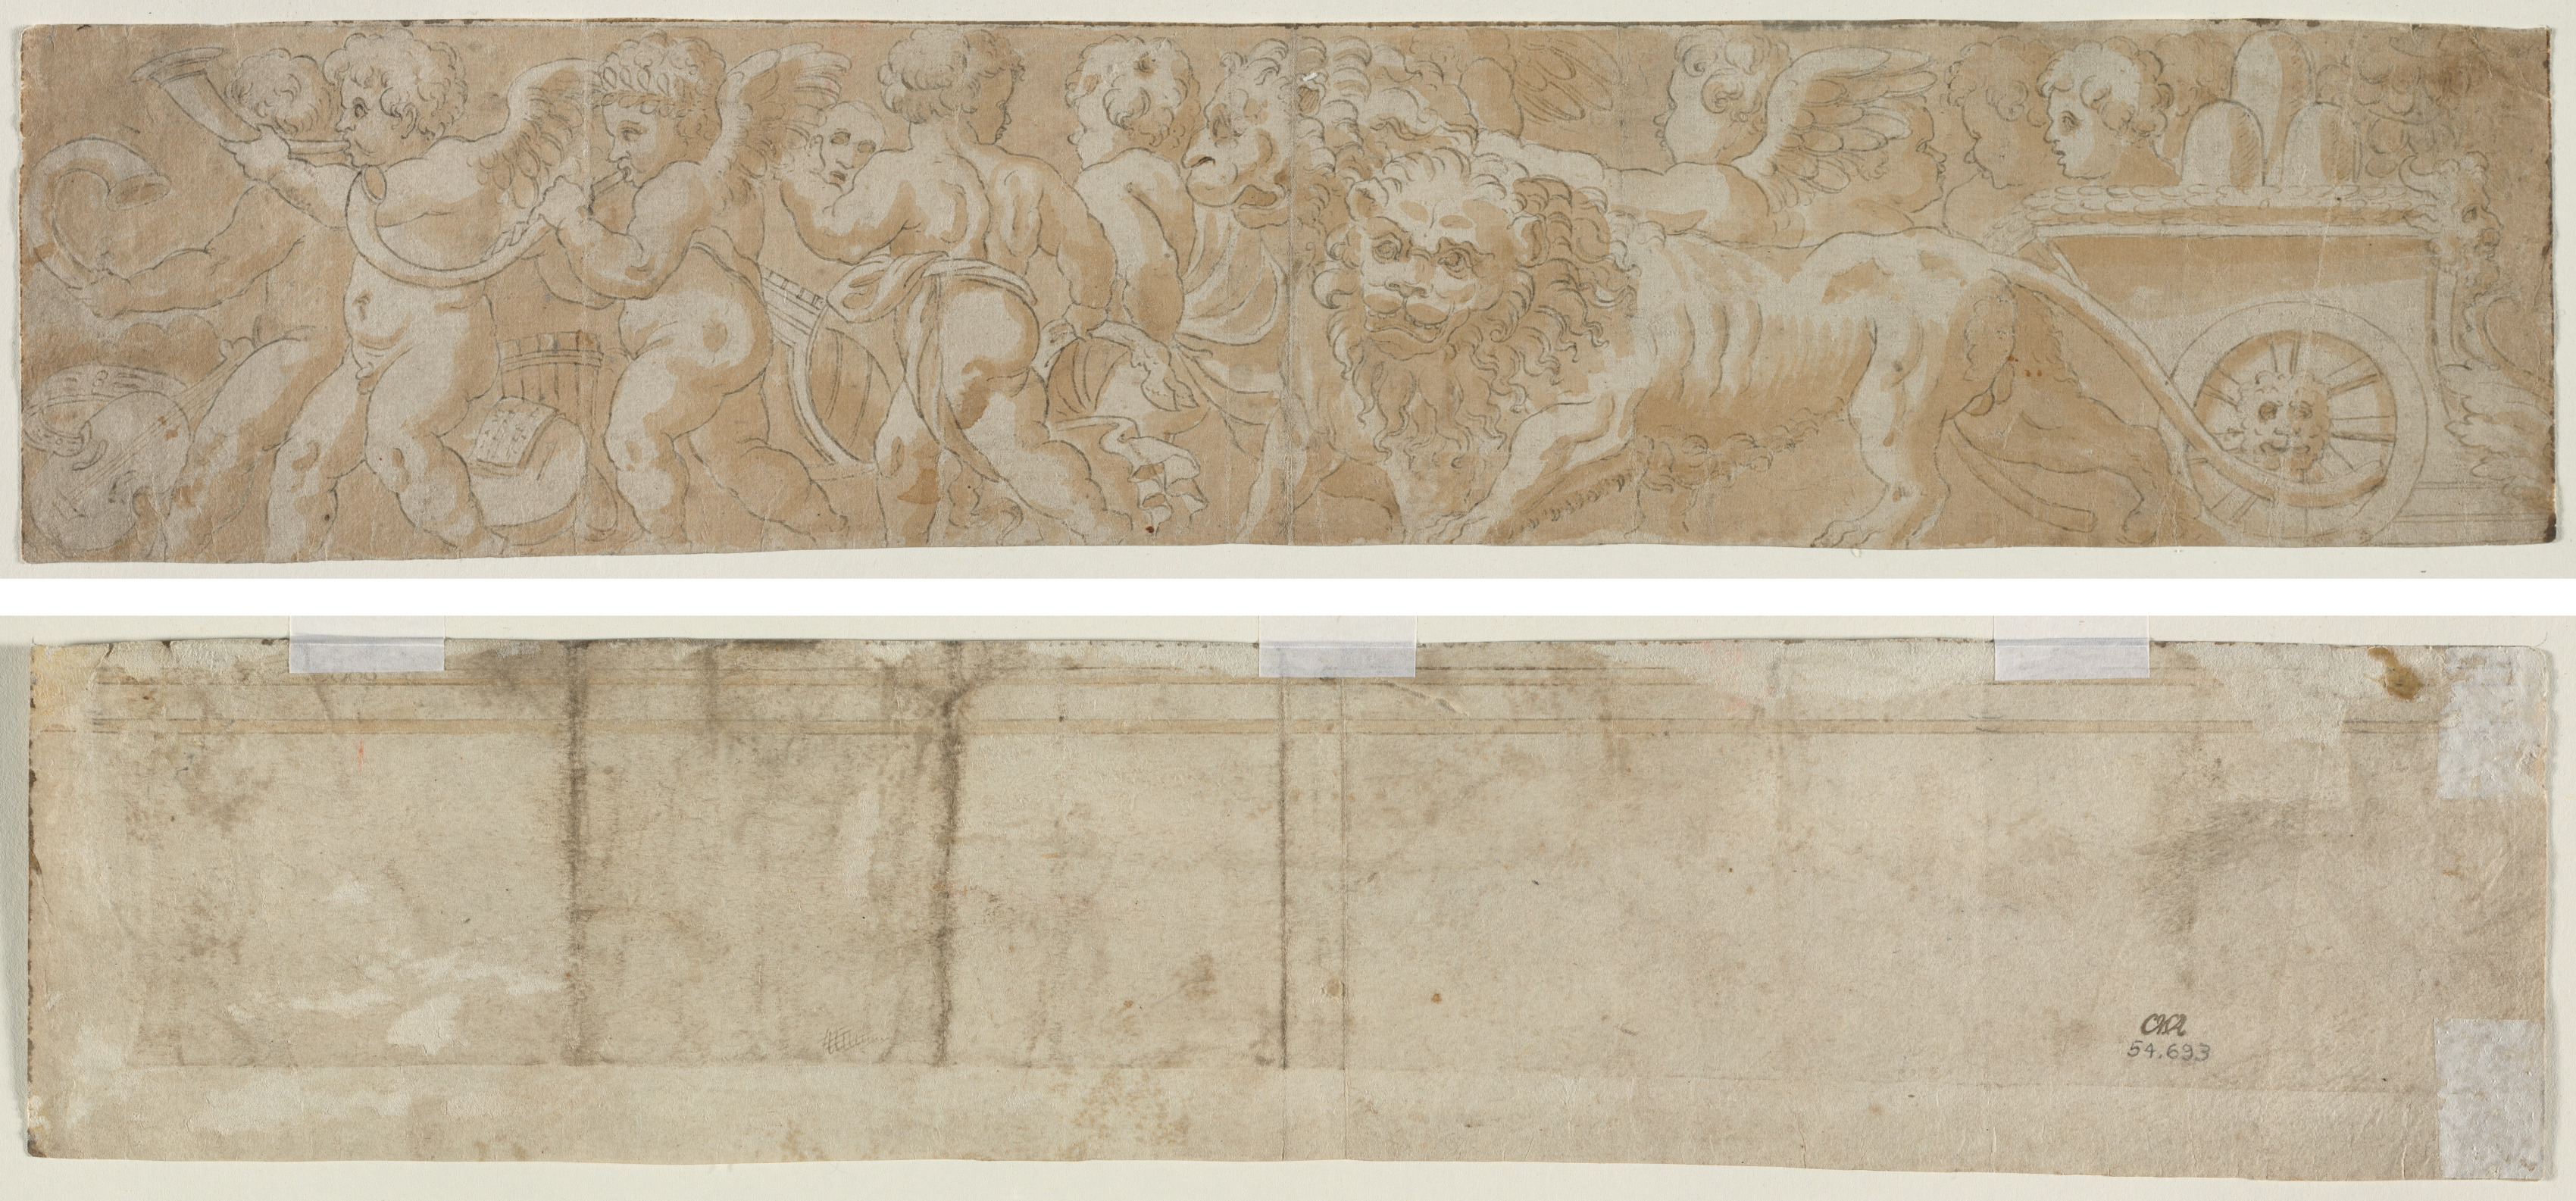 Chariot Drawn by Lions with Amorini (recto) Partial Architectural Study (verso) 